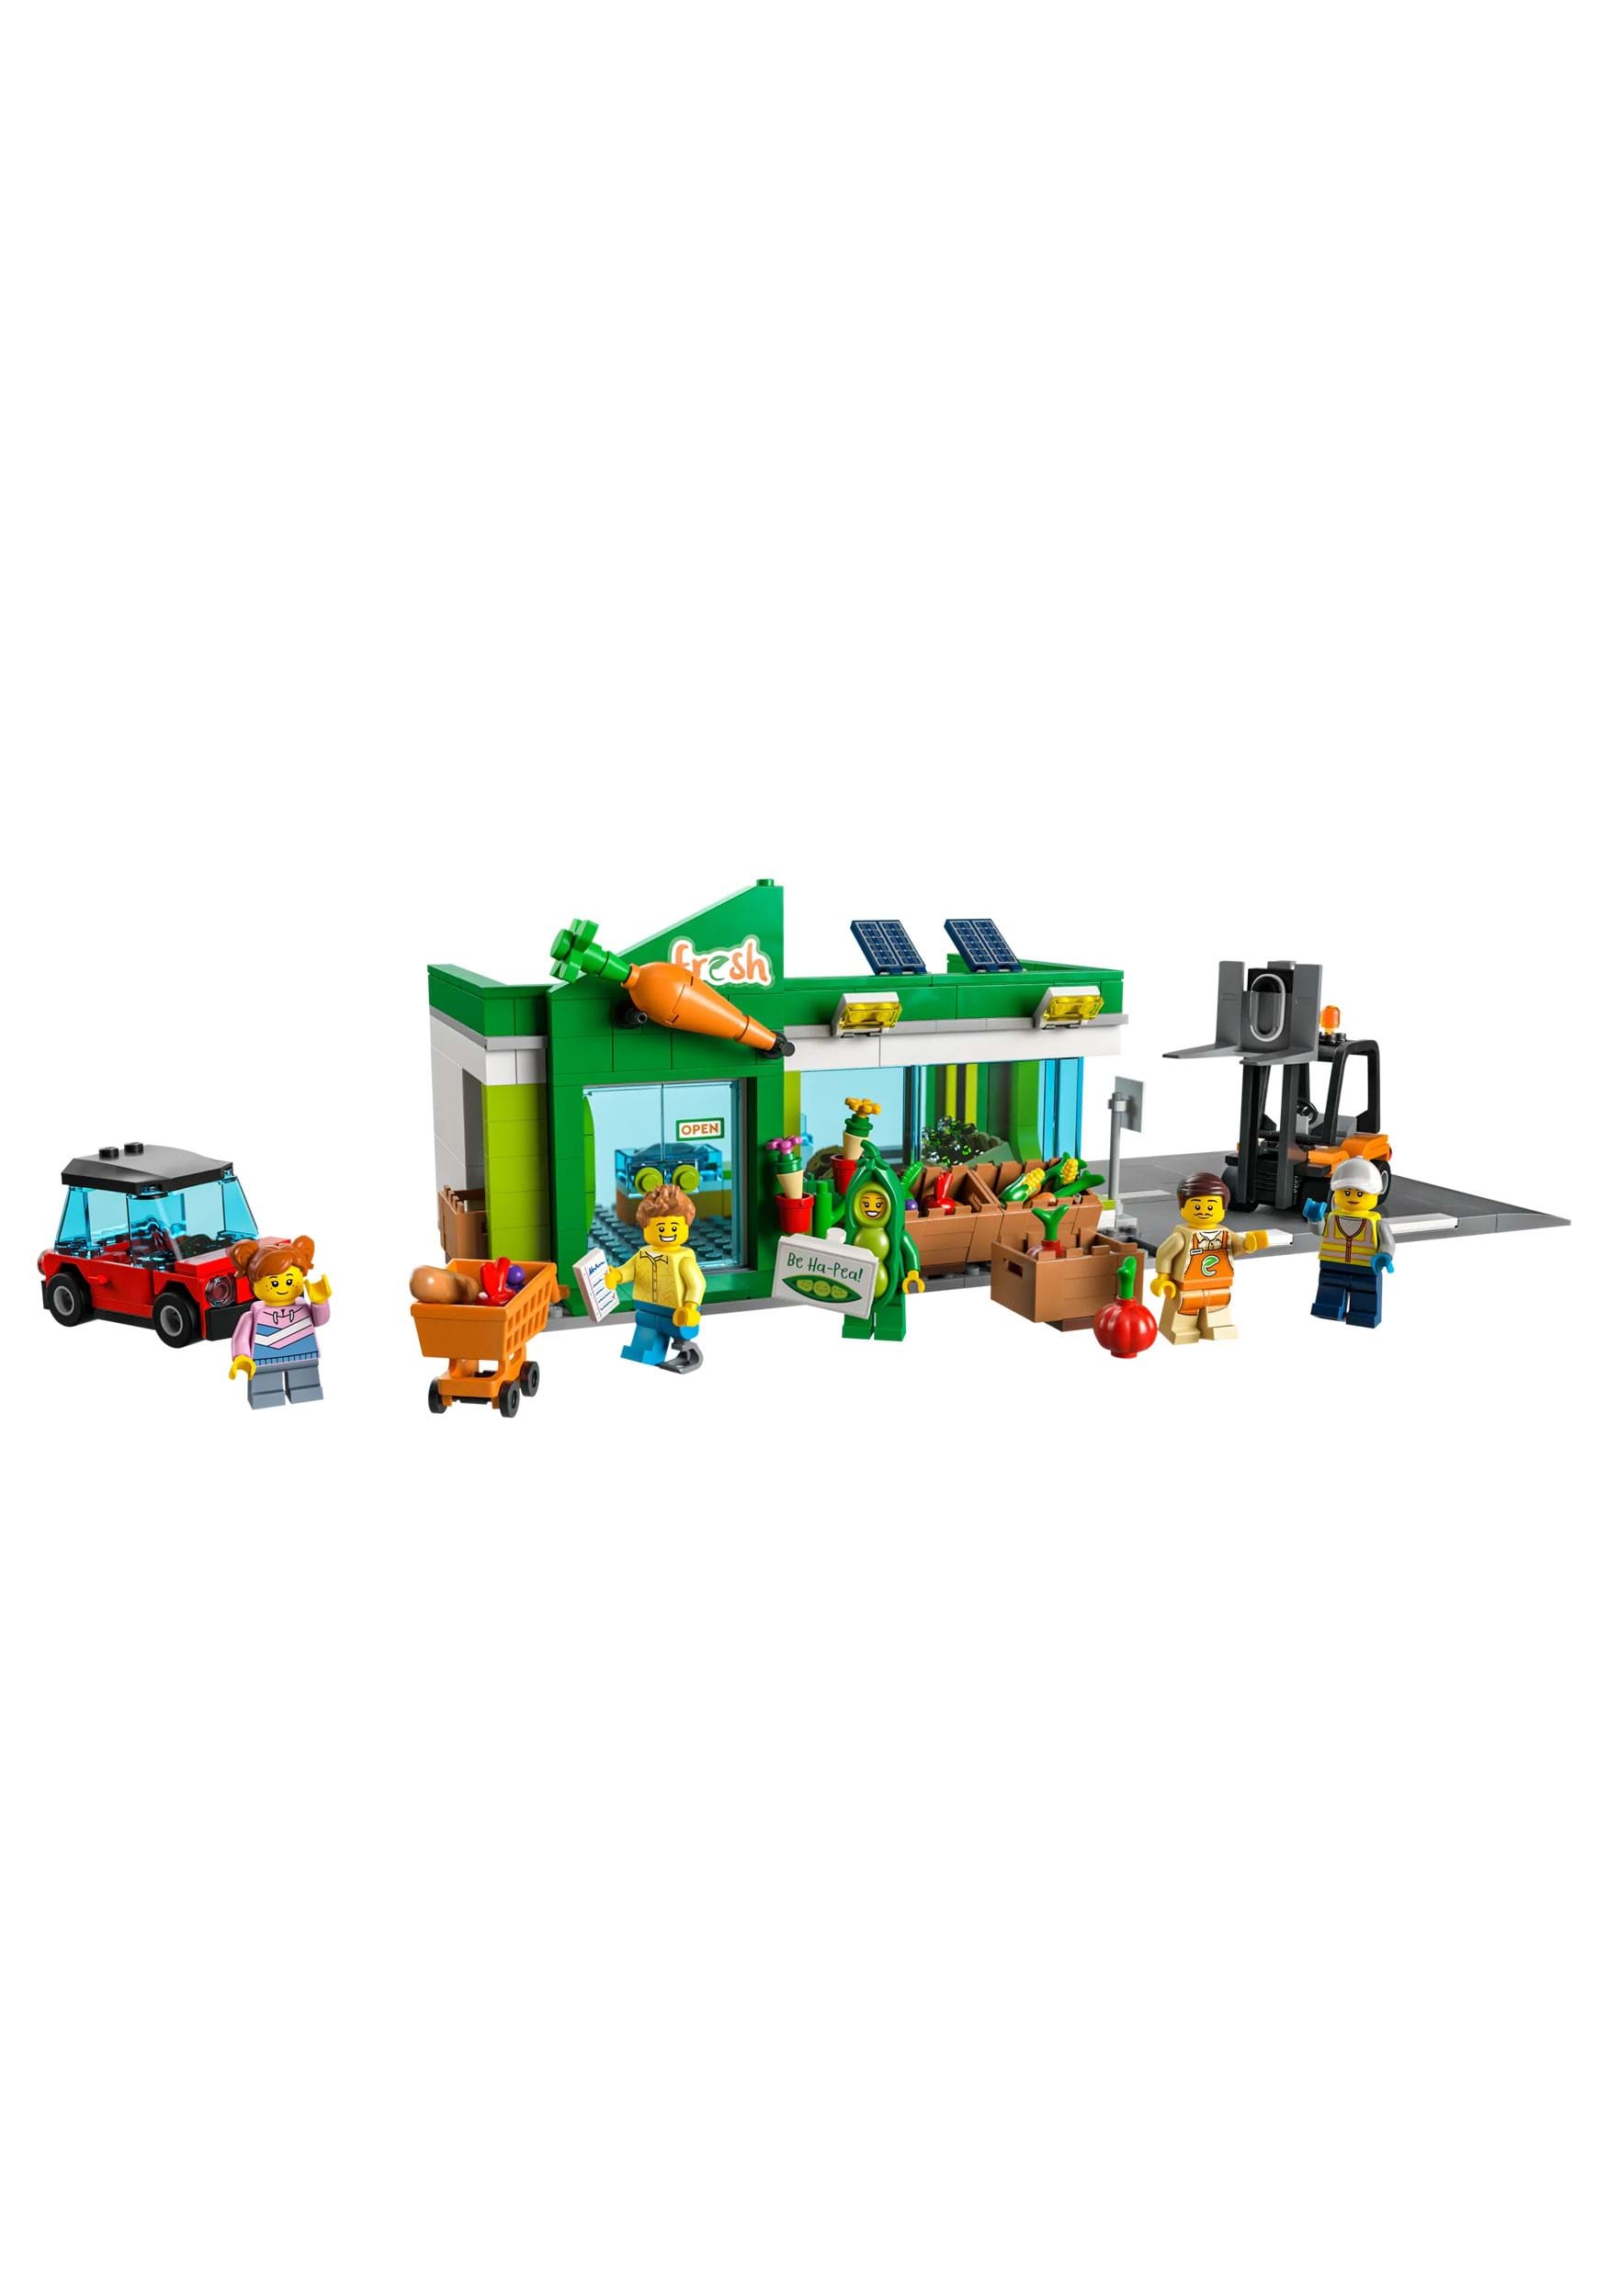 LEGO City Grocery Store Playset